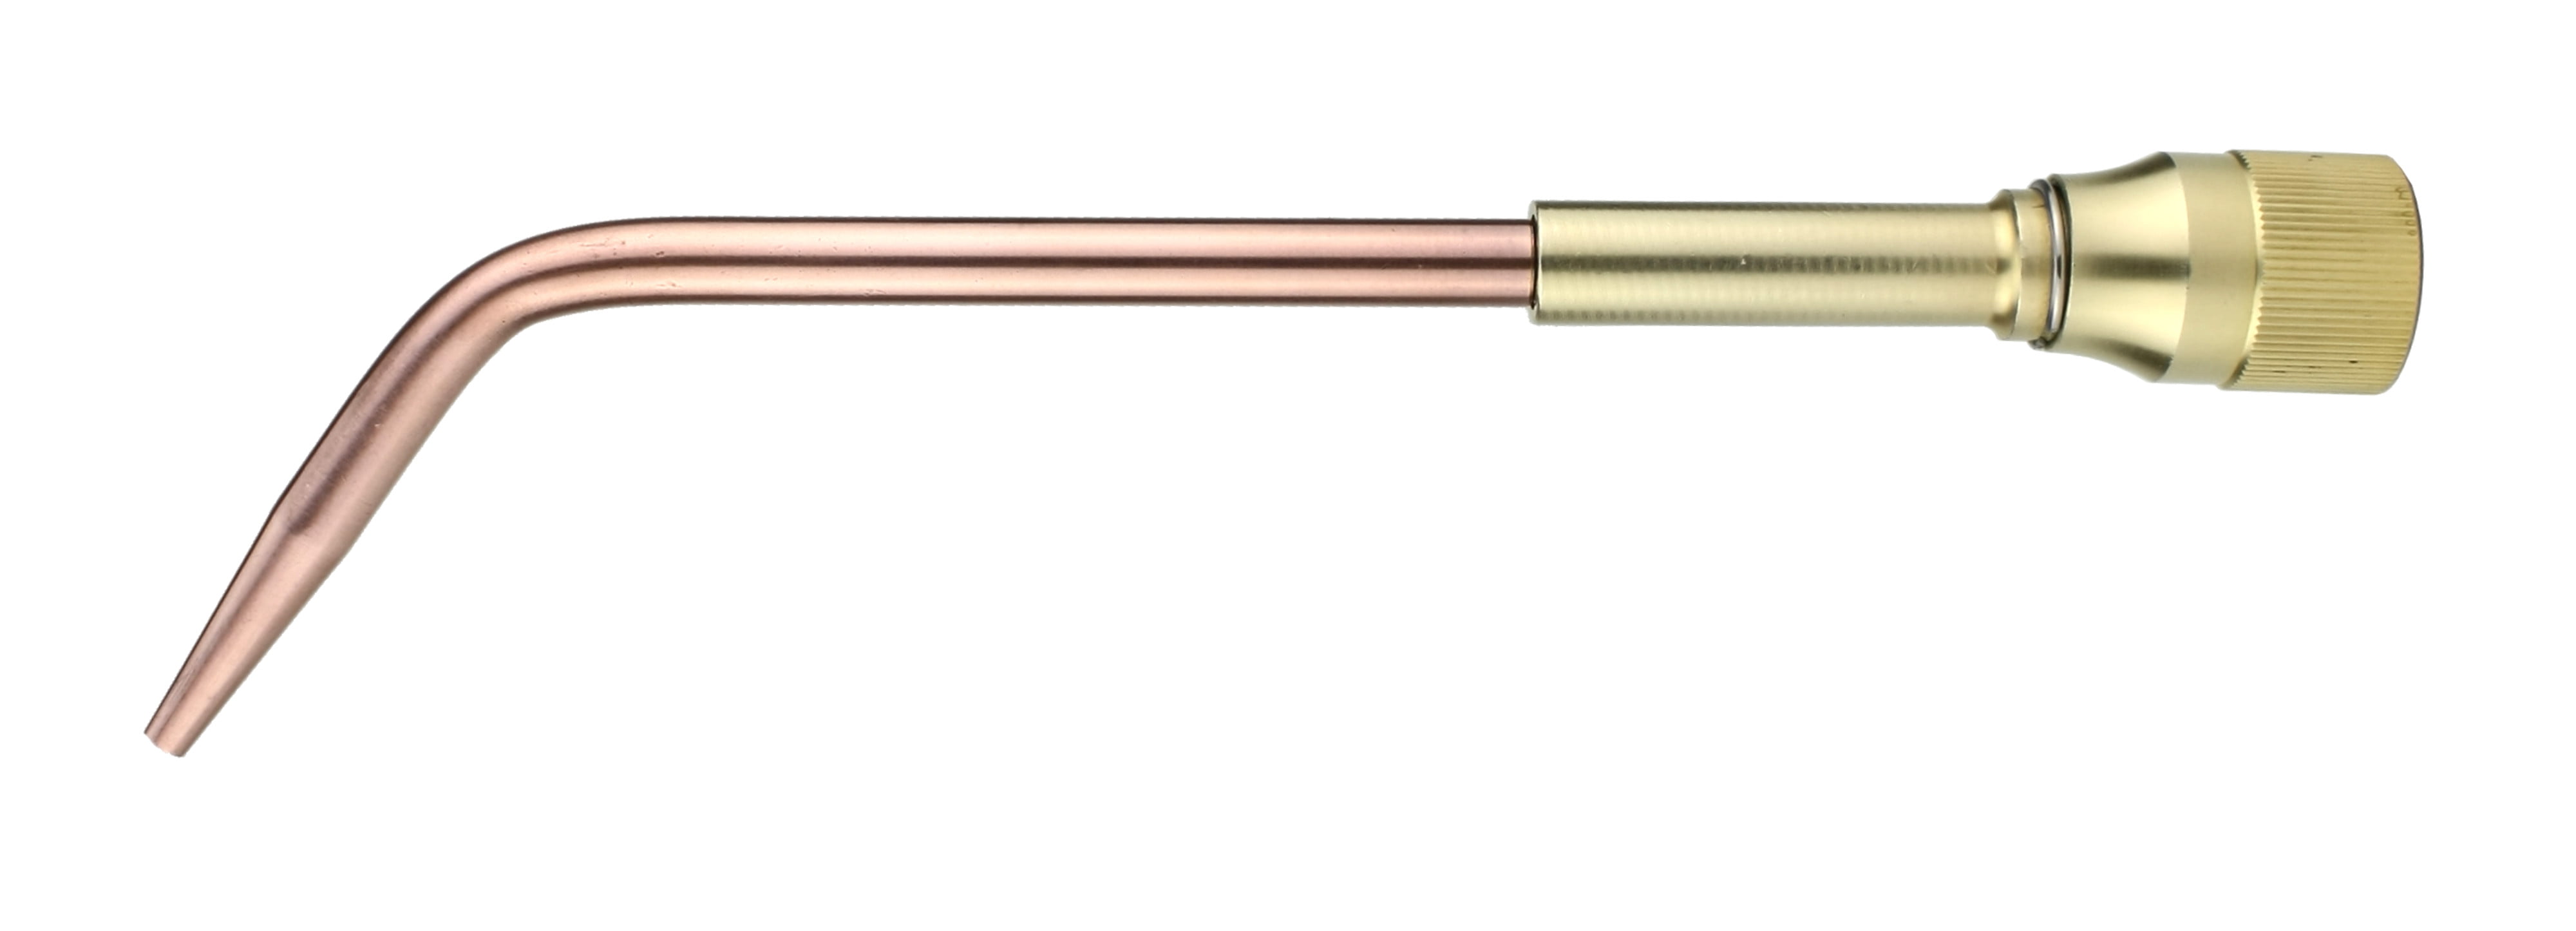 Mixer 3 Size SÜA Acetylene Welding & Brazing Tip 23A90 Compatible with Harris Torches D-85 